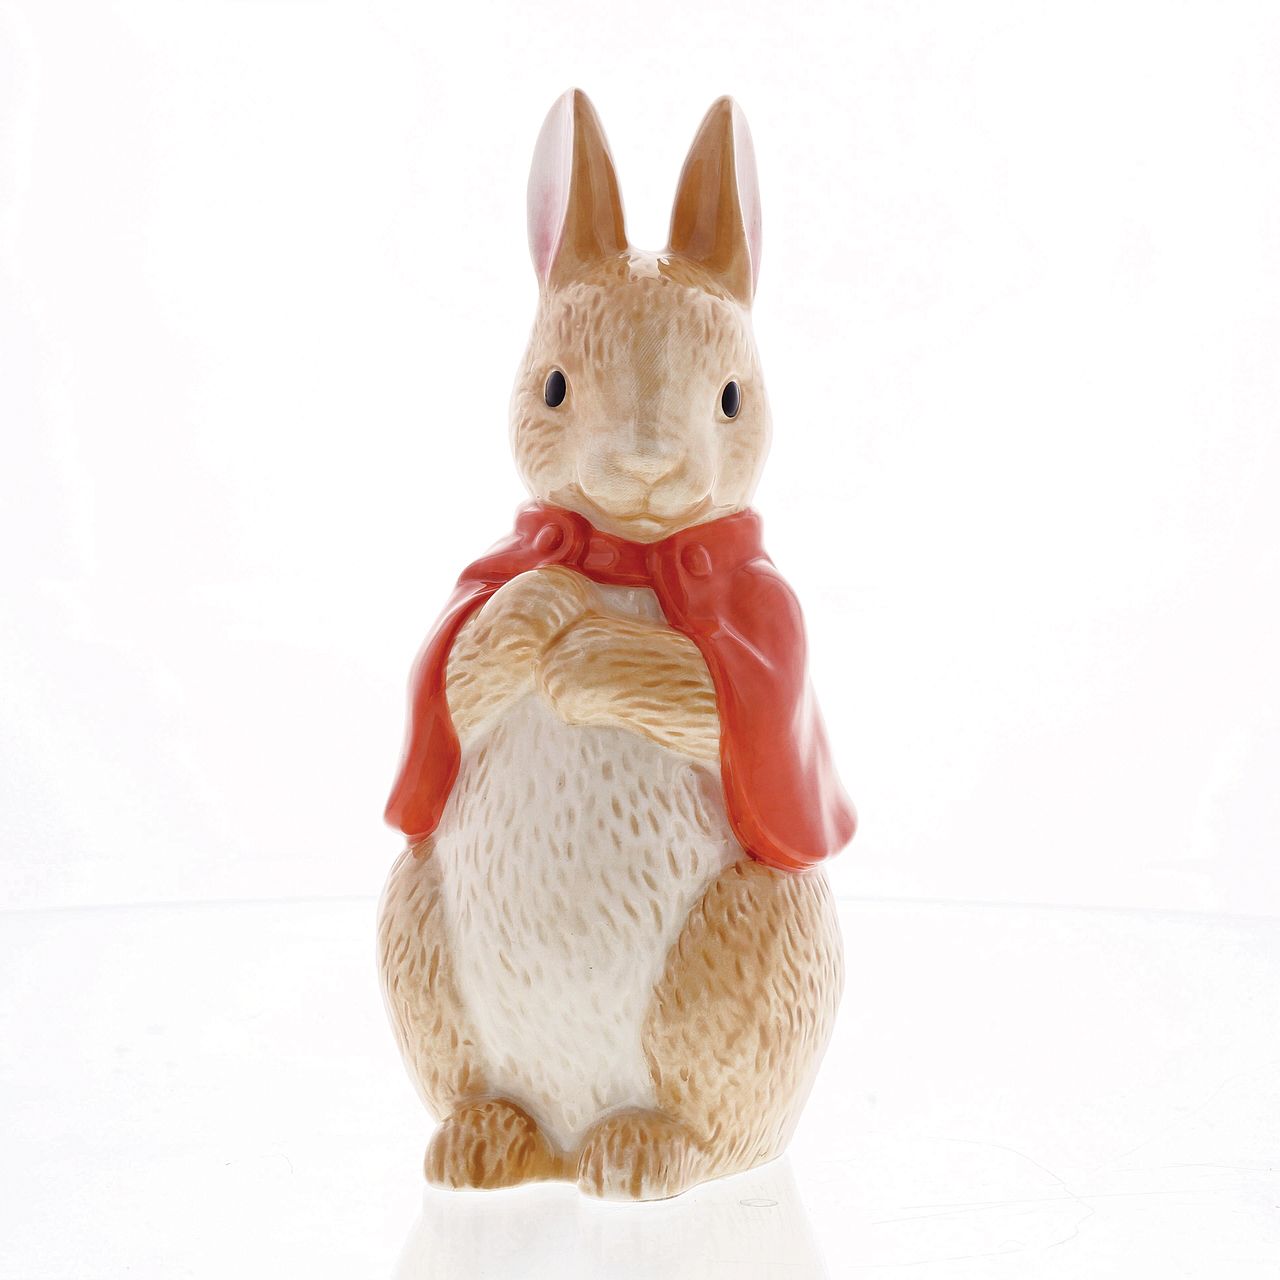 Beatrix Potter Flopsy Sculpted Money Bank  This delightful and charming Flopsy shaped money box would make an ideal christening gift, for collectors and Peter Rabbit fans, both young and old. The artwork is taken from the original illustrations from the Beatrix Potter stories.